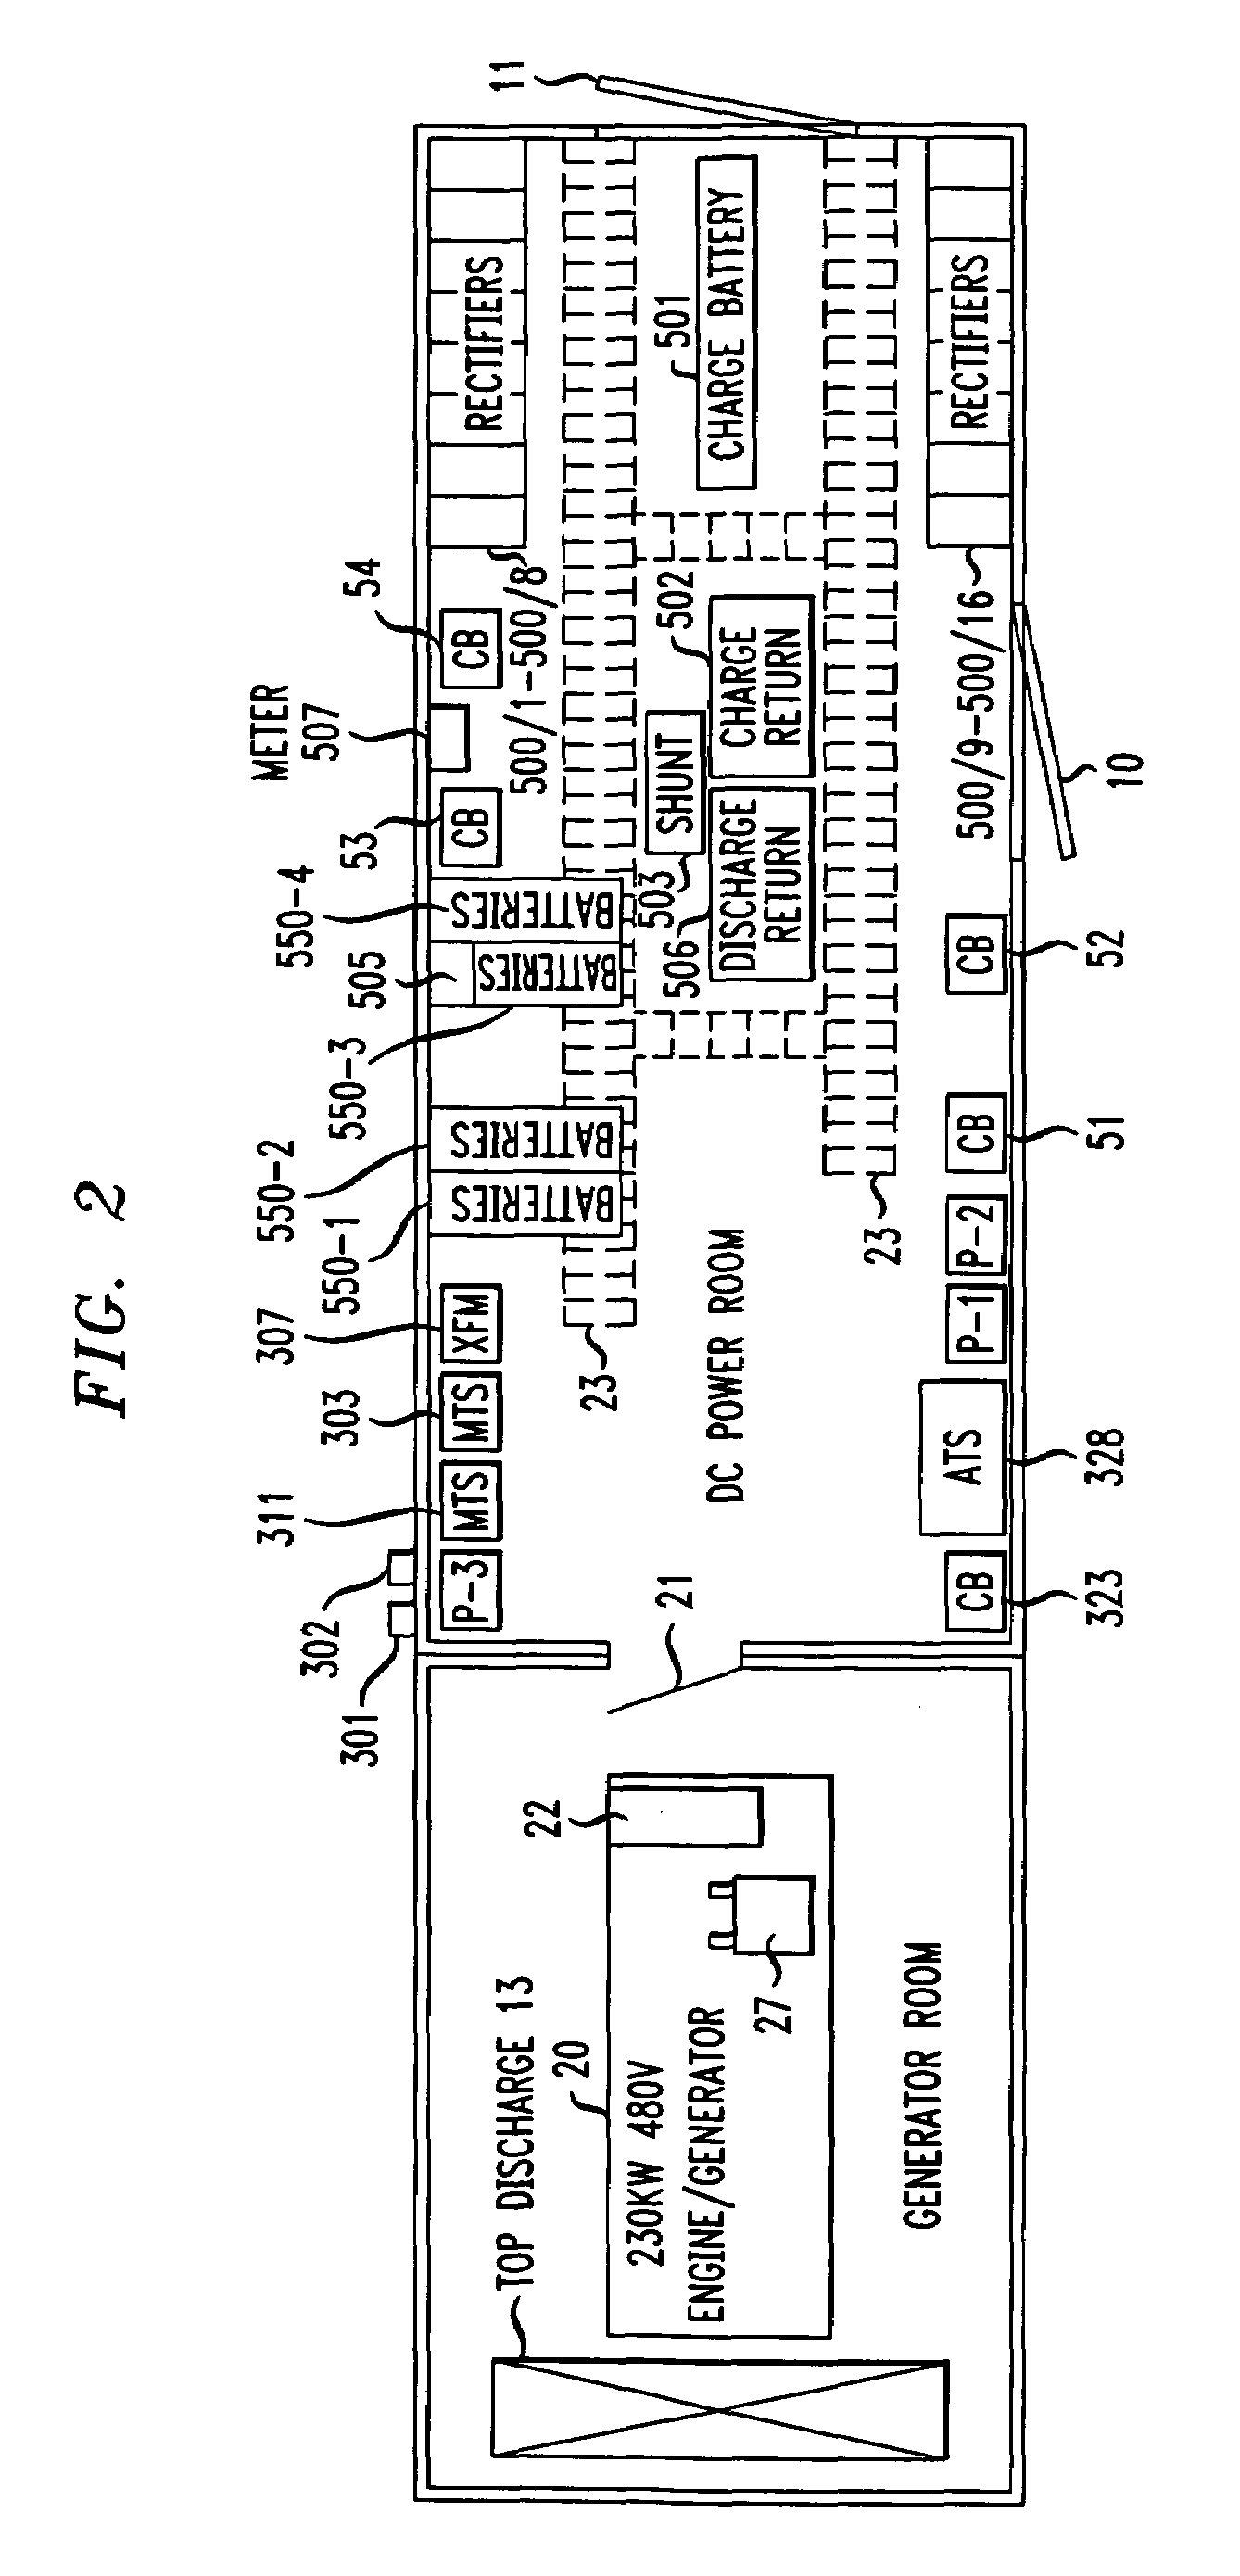 Mobile AC-to-DC power conversion system